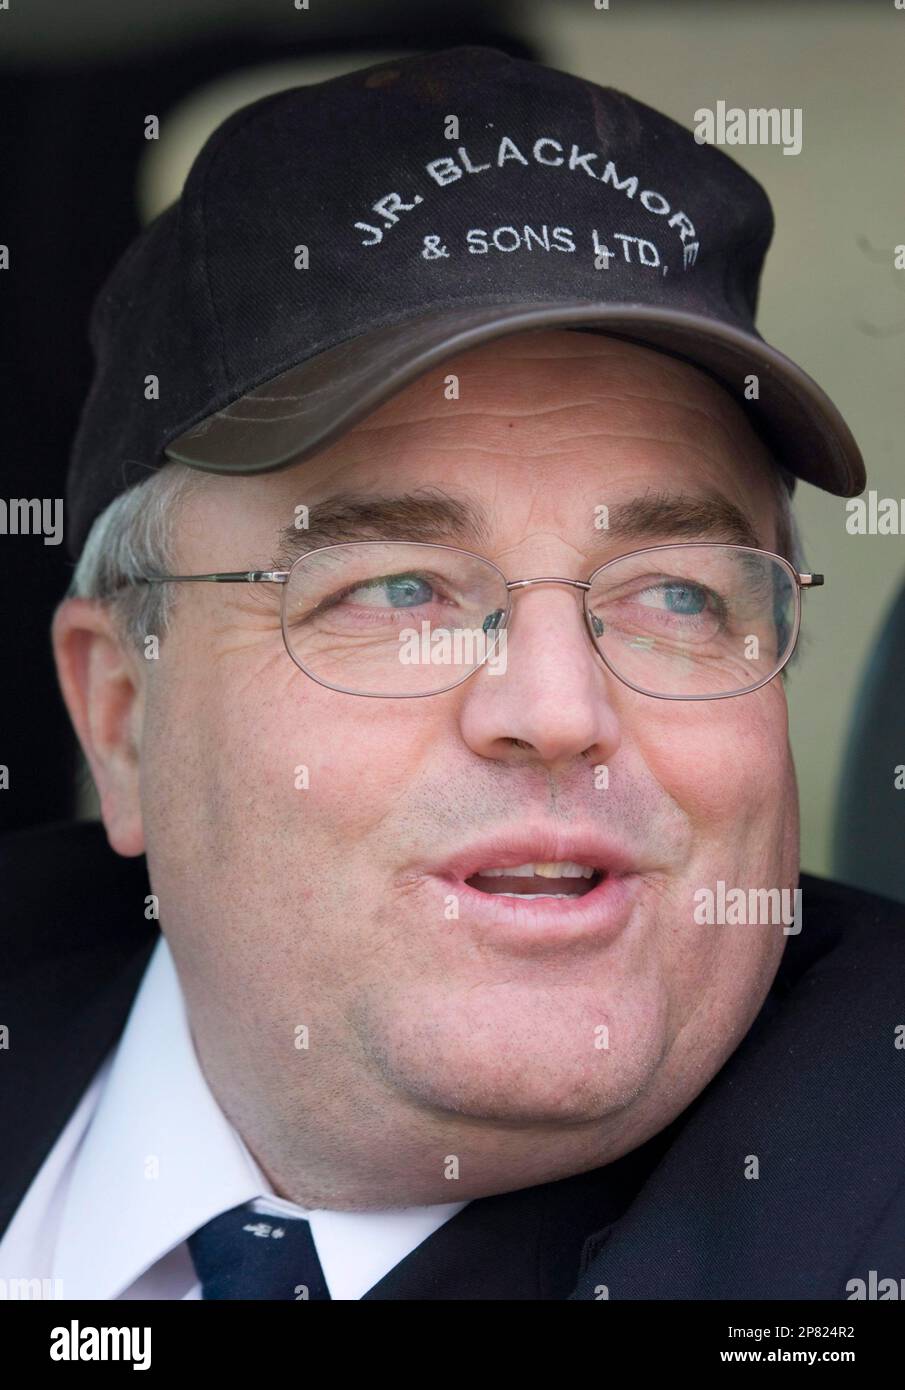 File This April 20 2008 File Photo Shows Winston Blackmore The Religious Leader Of The 